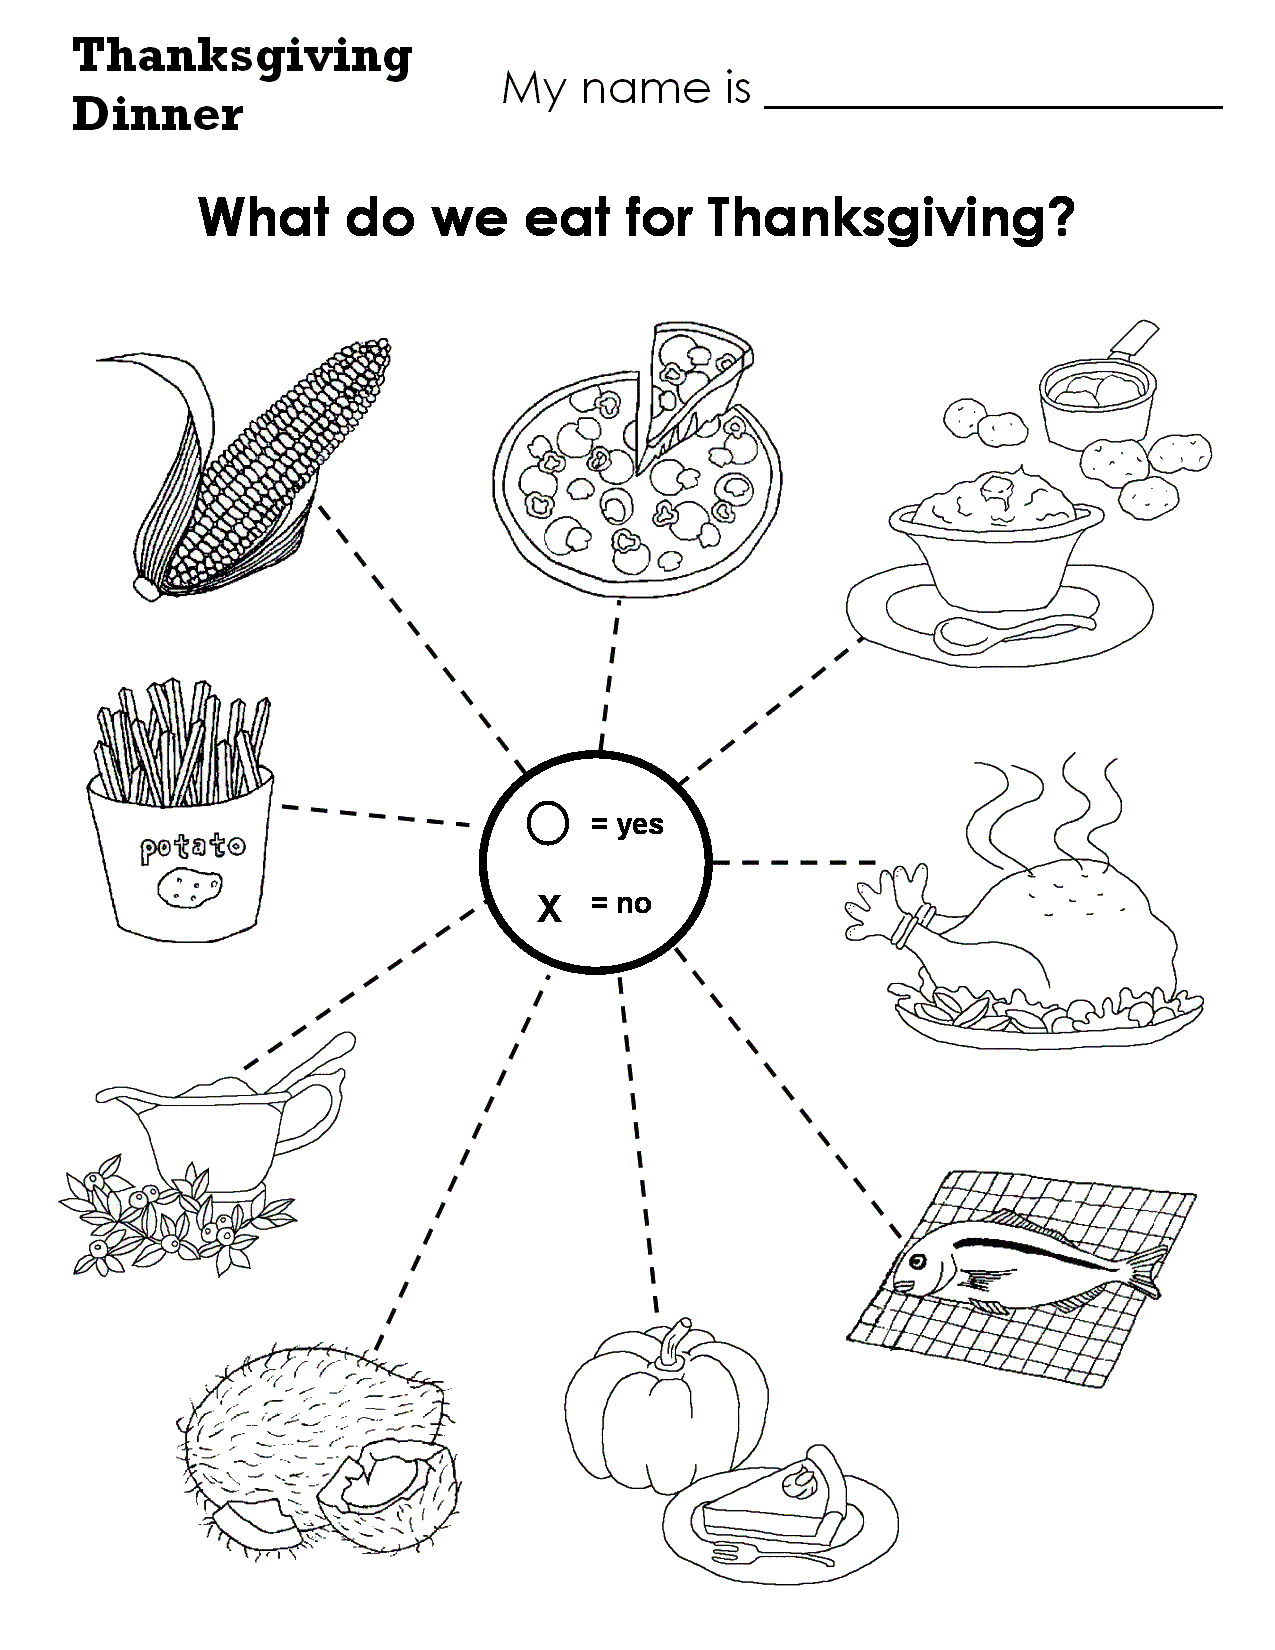 Thanksgiving Worksheets For Preschoolers  Suzanneoshinsky